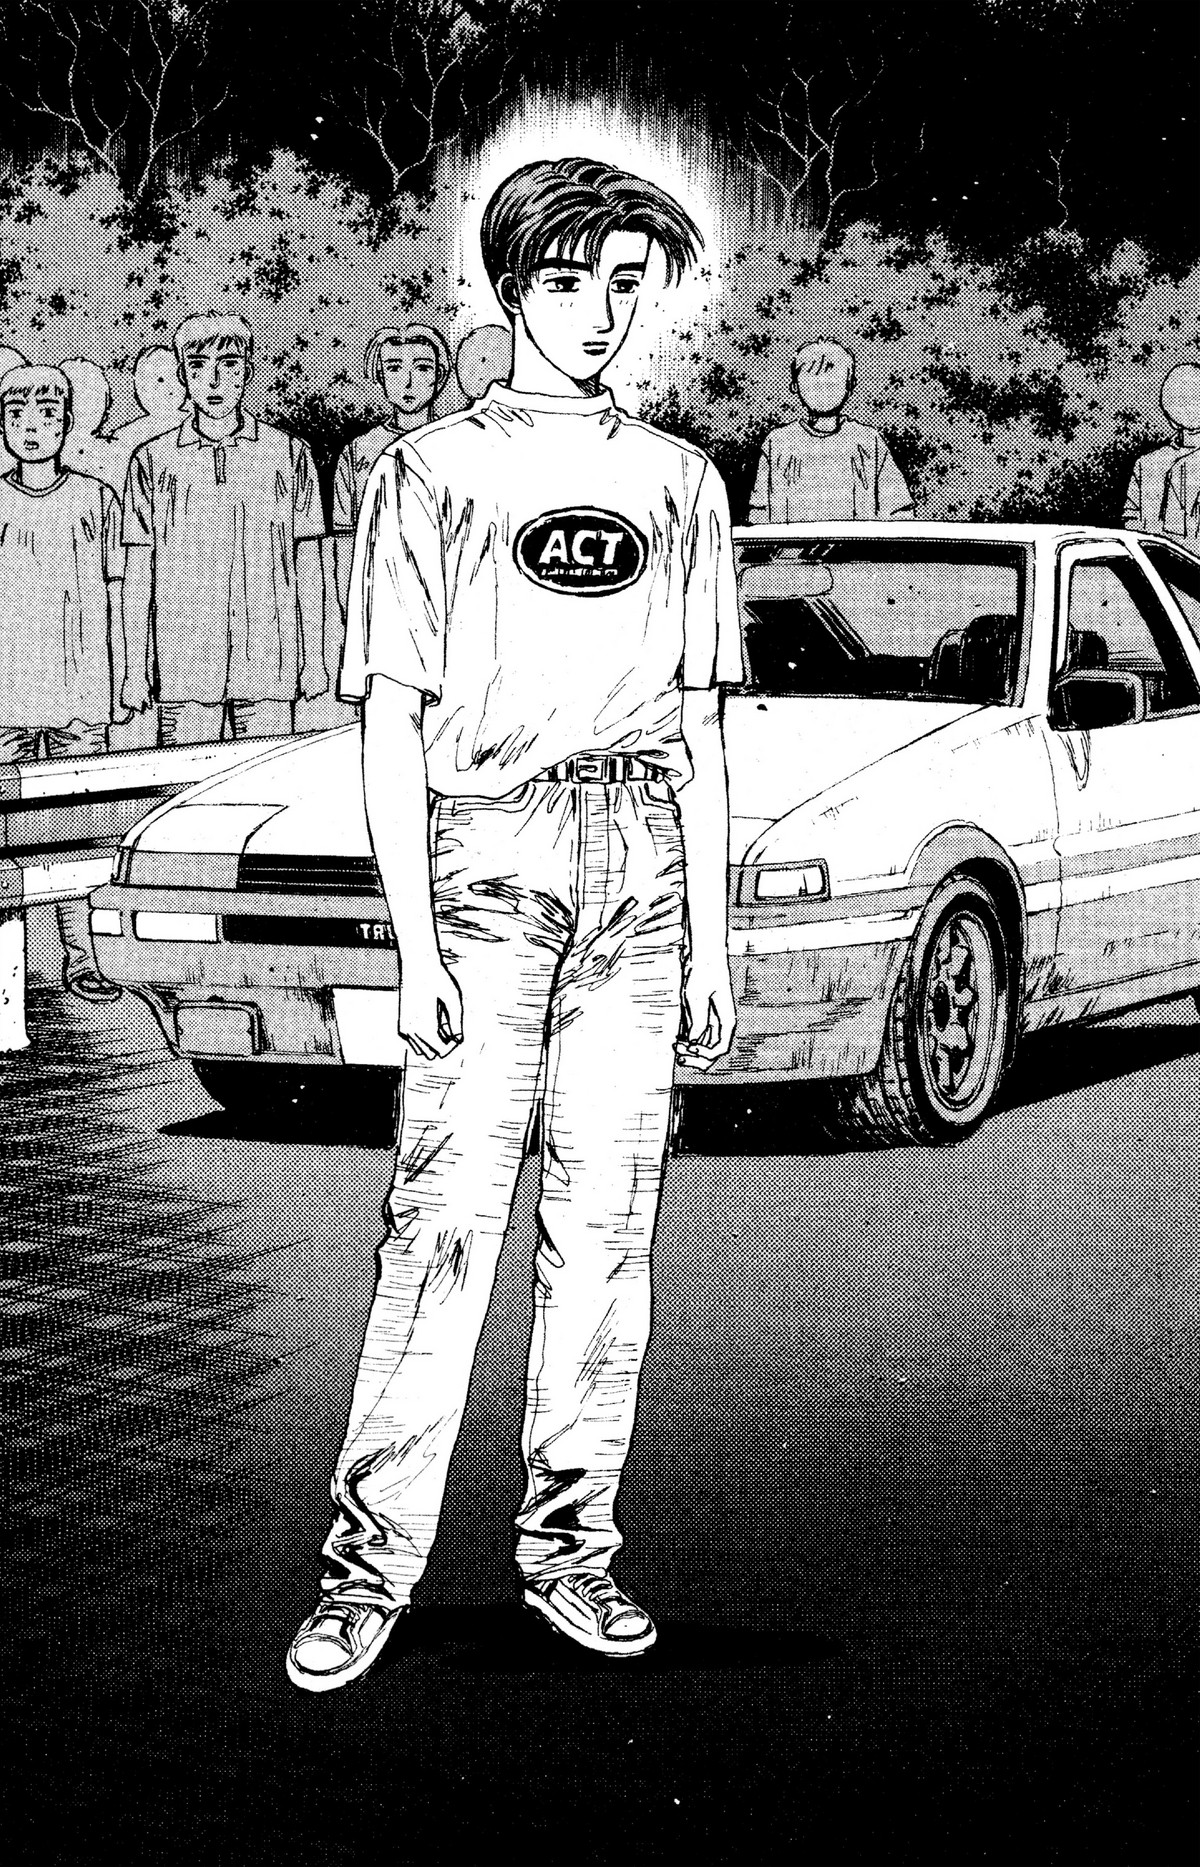 Initial D World - Ever wonder why they call it an anime